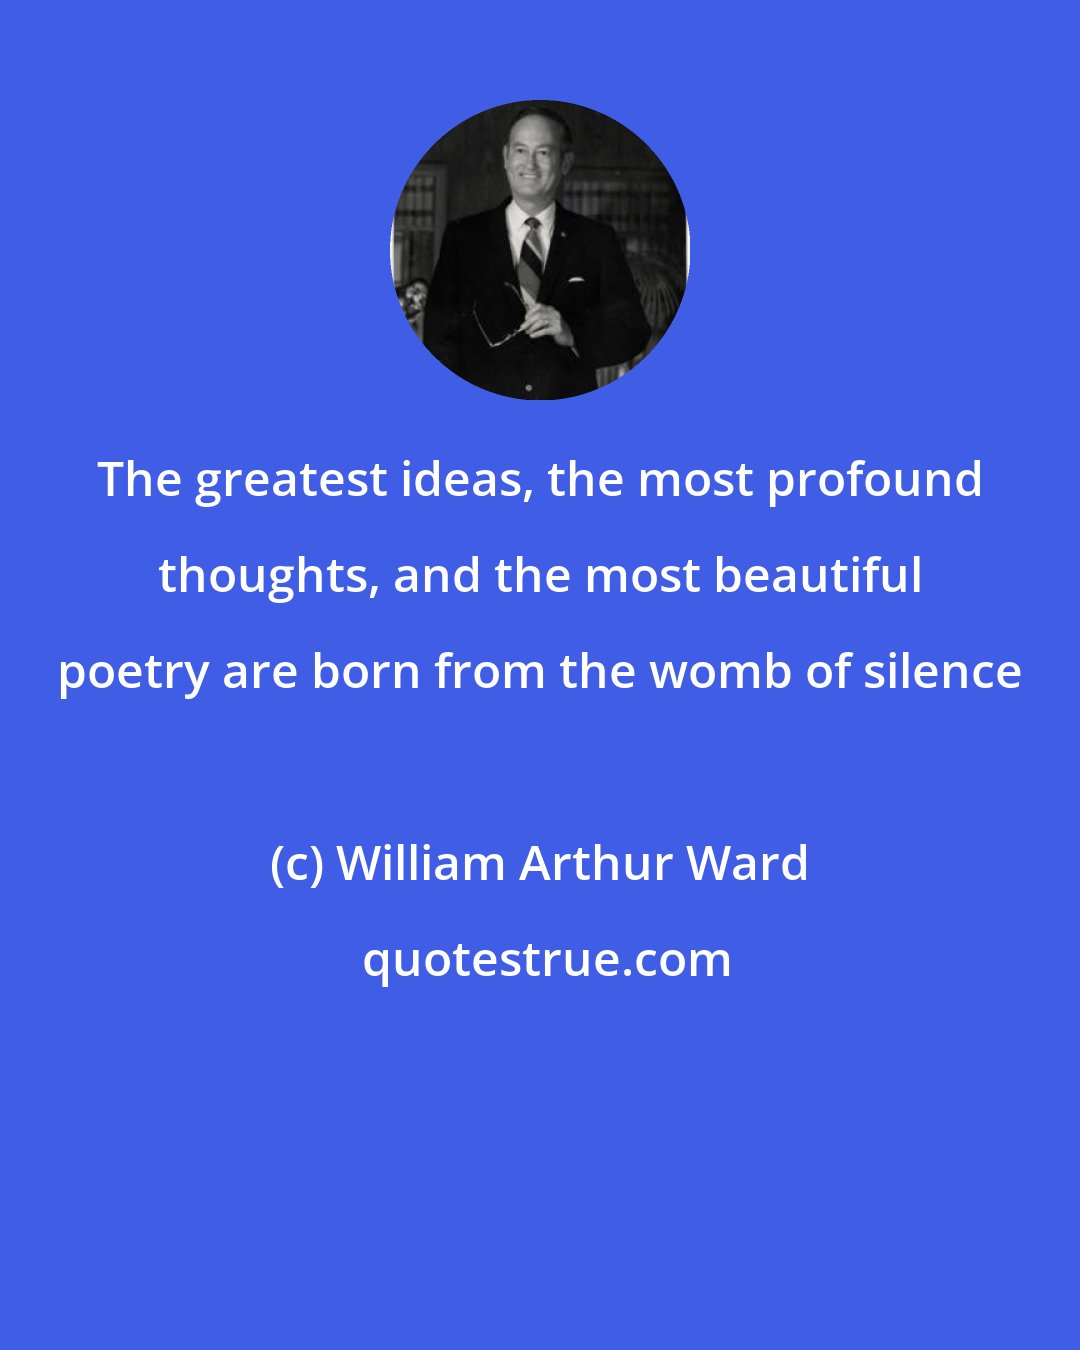 William Arthur Ward: The greatest ideas, the most profound thoughts, and the most beautiful poetry are born from the womb of silence